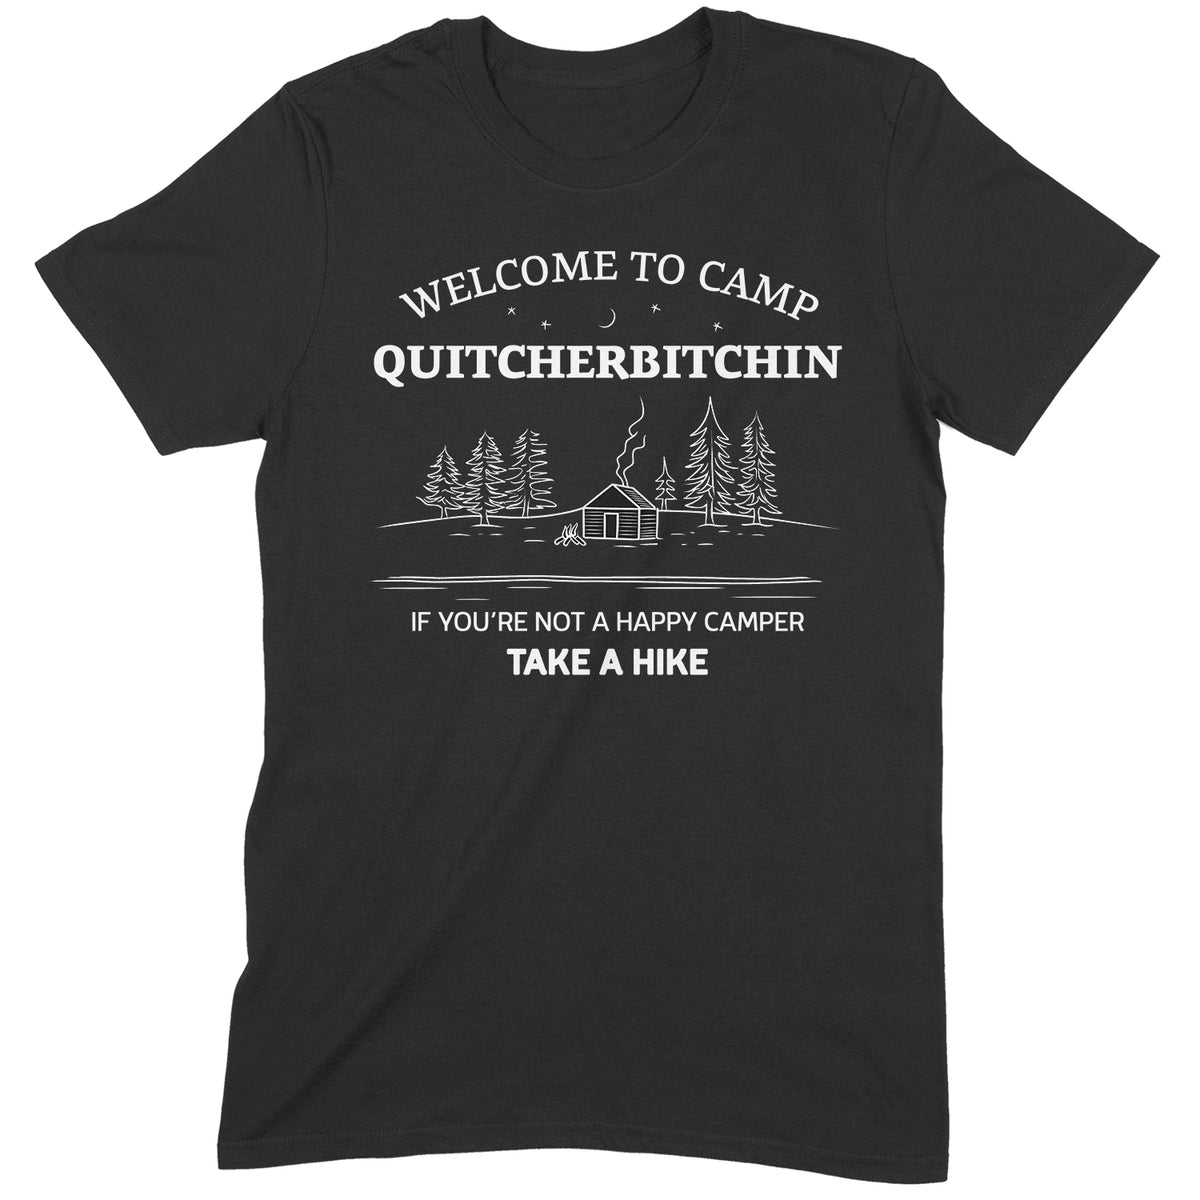 "Welcome To Camp" Premium Midweight Ringspun Cotton T-Shirt - Mens/Womens Fits